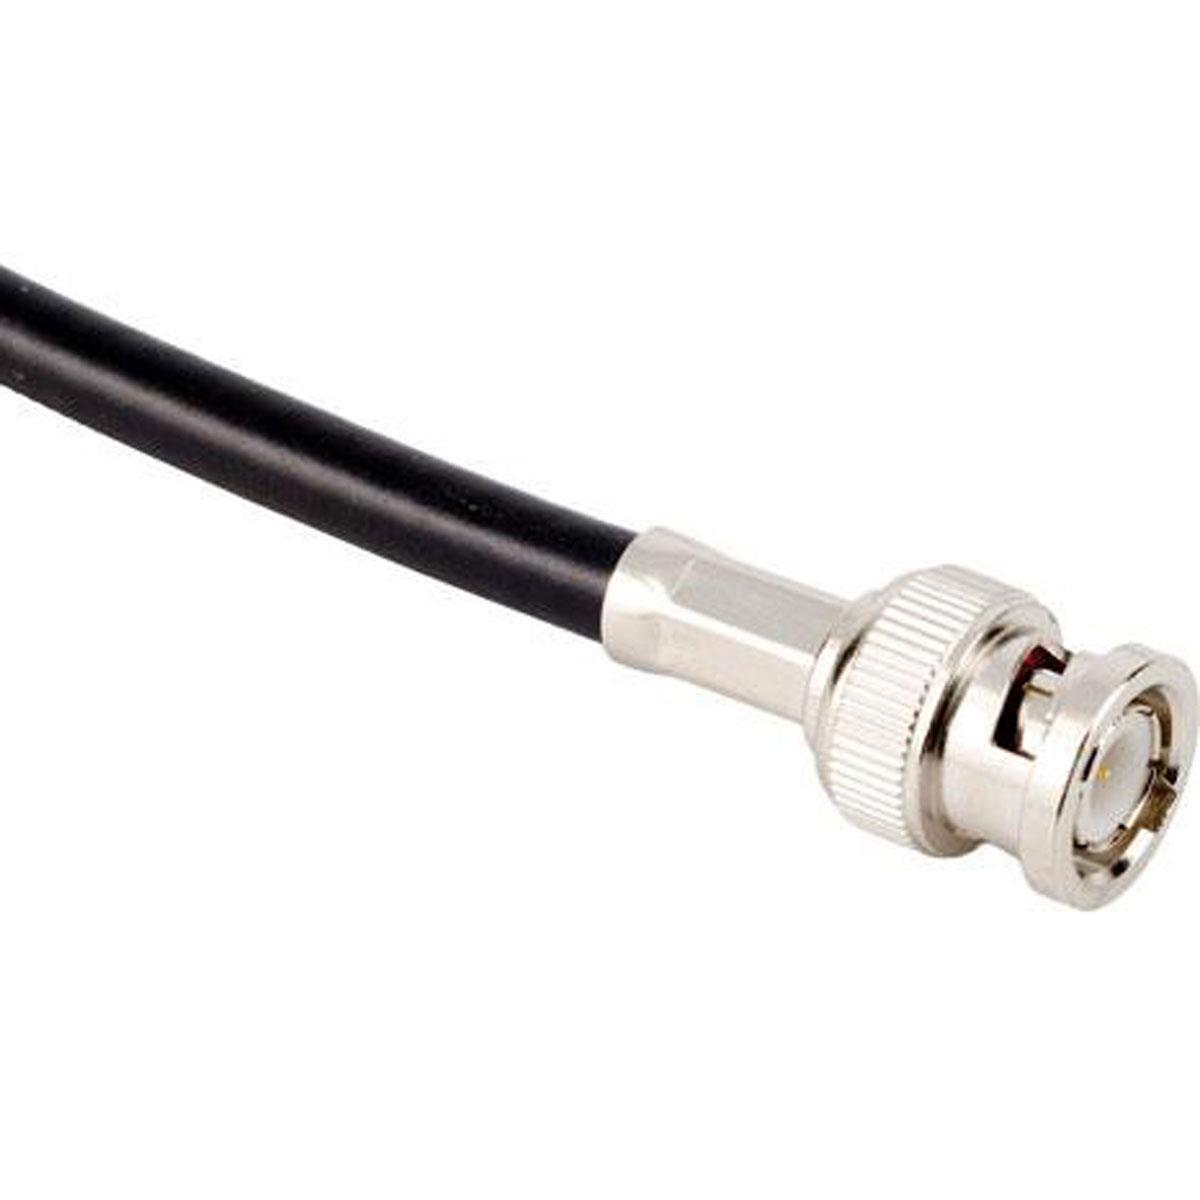 Image of Lectrosonics ARG2 2' Coaxial Cable for Remote Antennas